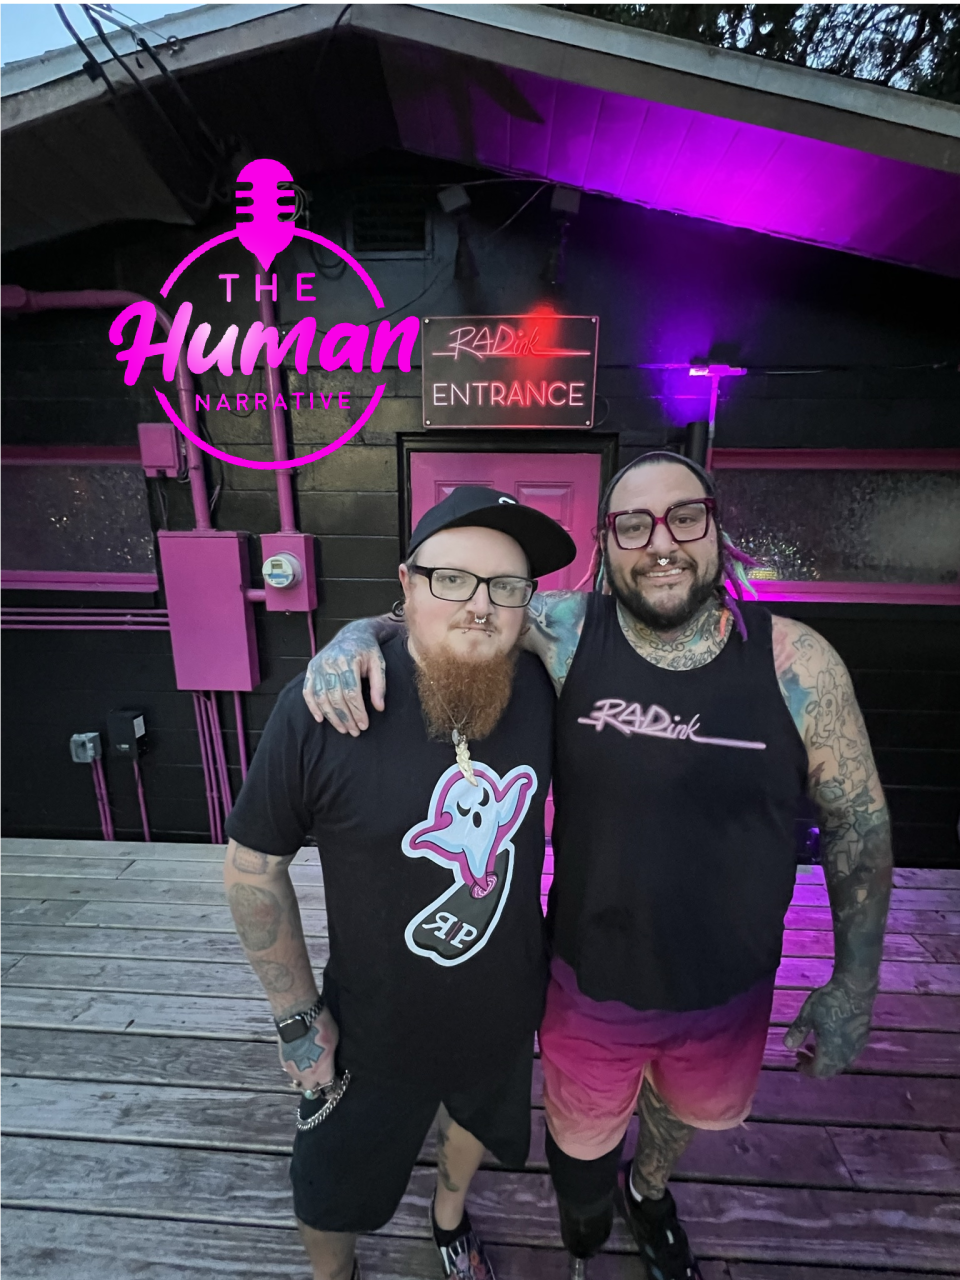 Chad Talley and Robbie Ripol are launching a series of public speaking events with rotating speakers and topics. The first event, "The Human Narrative: Facing Fear," will be at Rad Ink in Melbourne on Saturday, July 15 at 8 p.m.